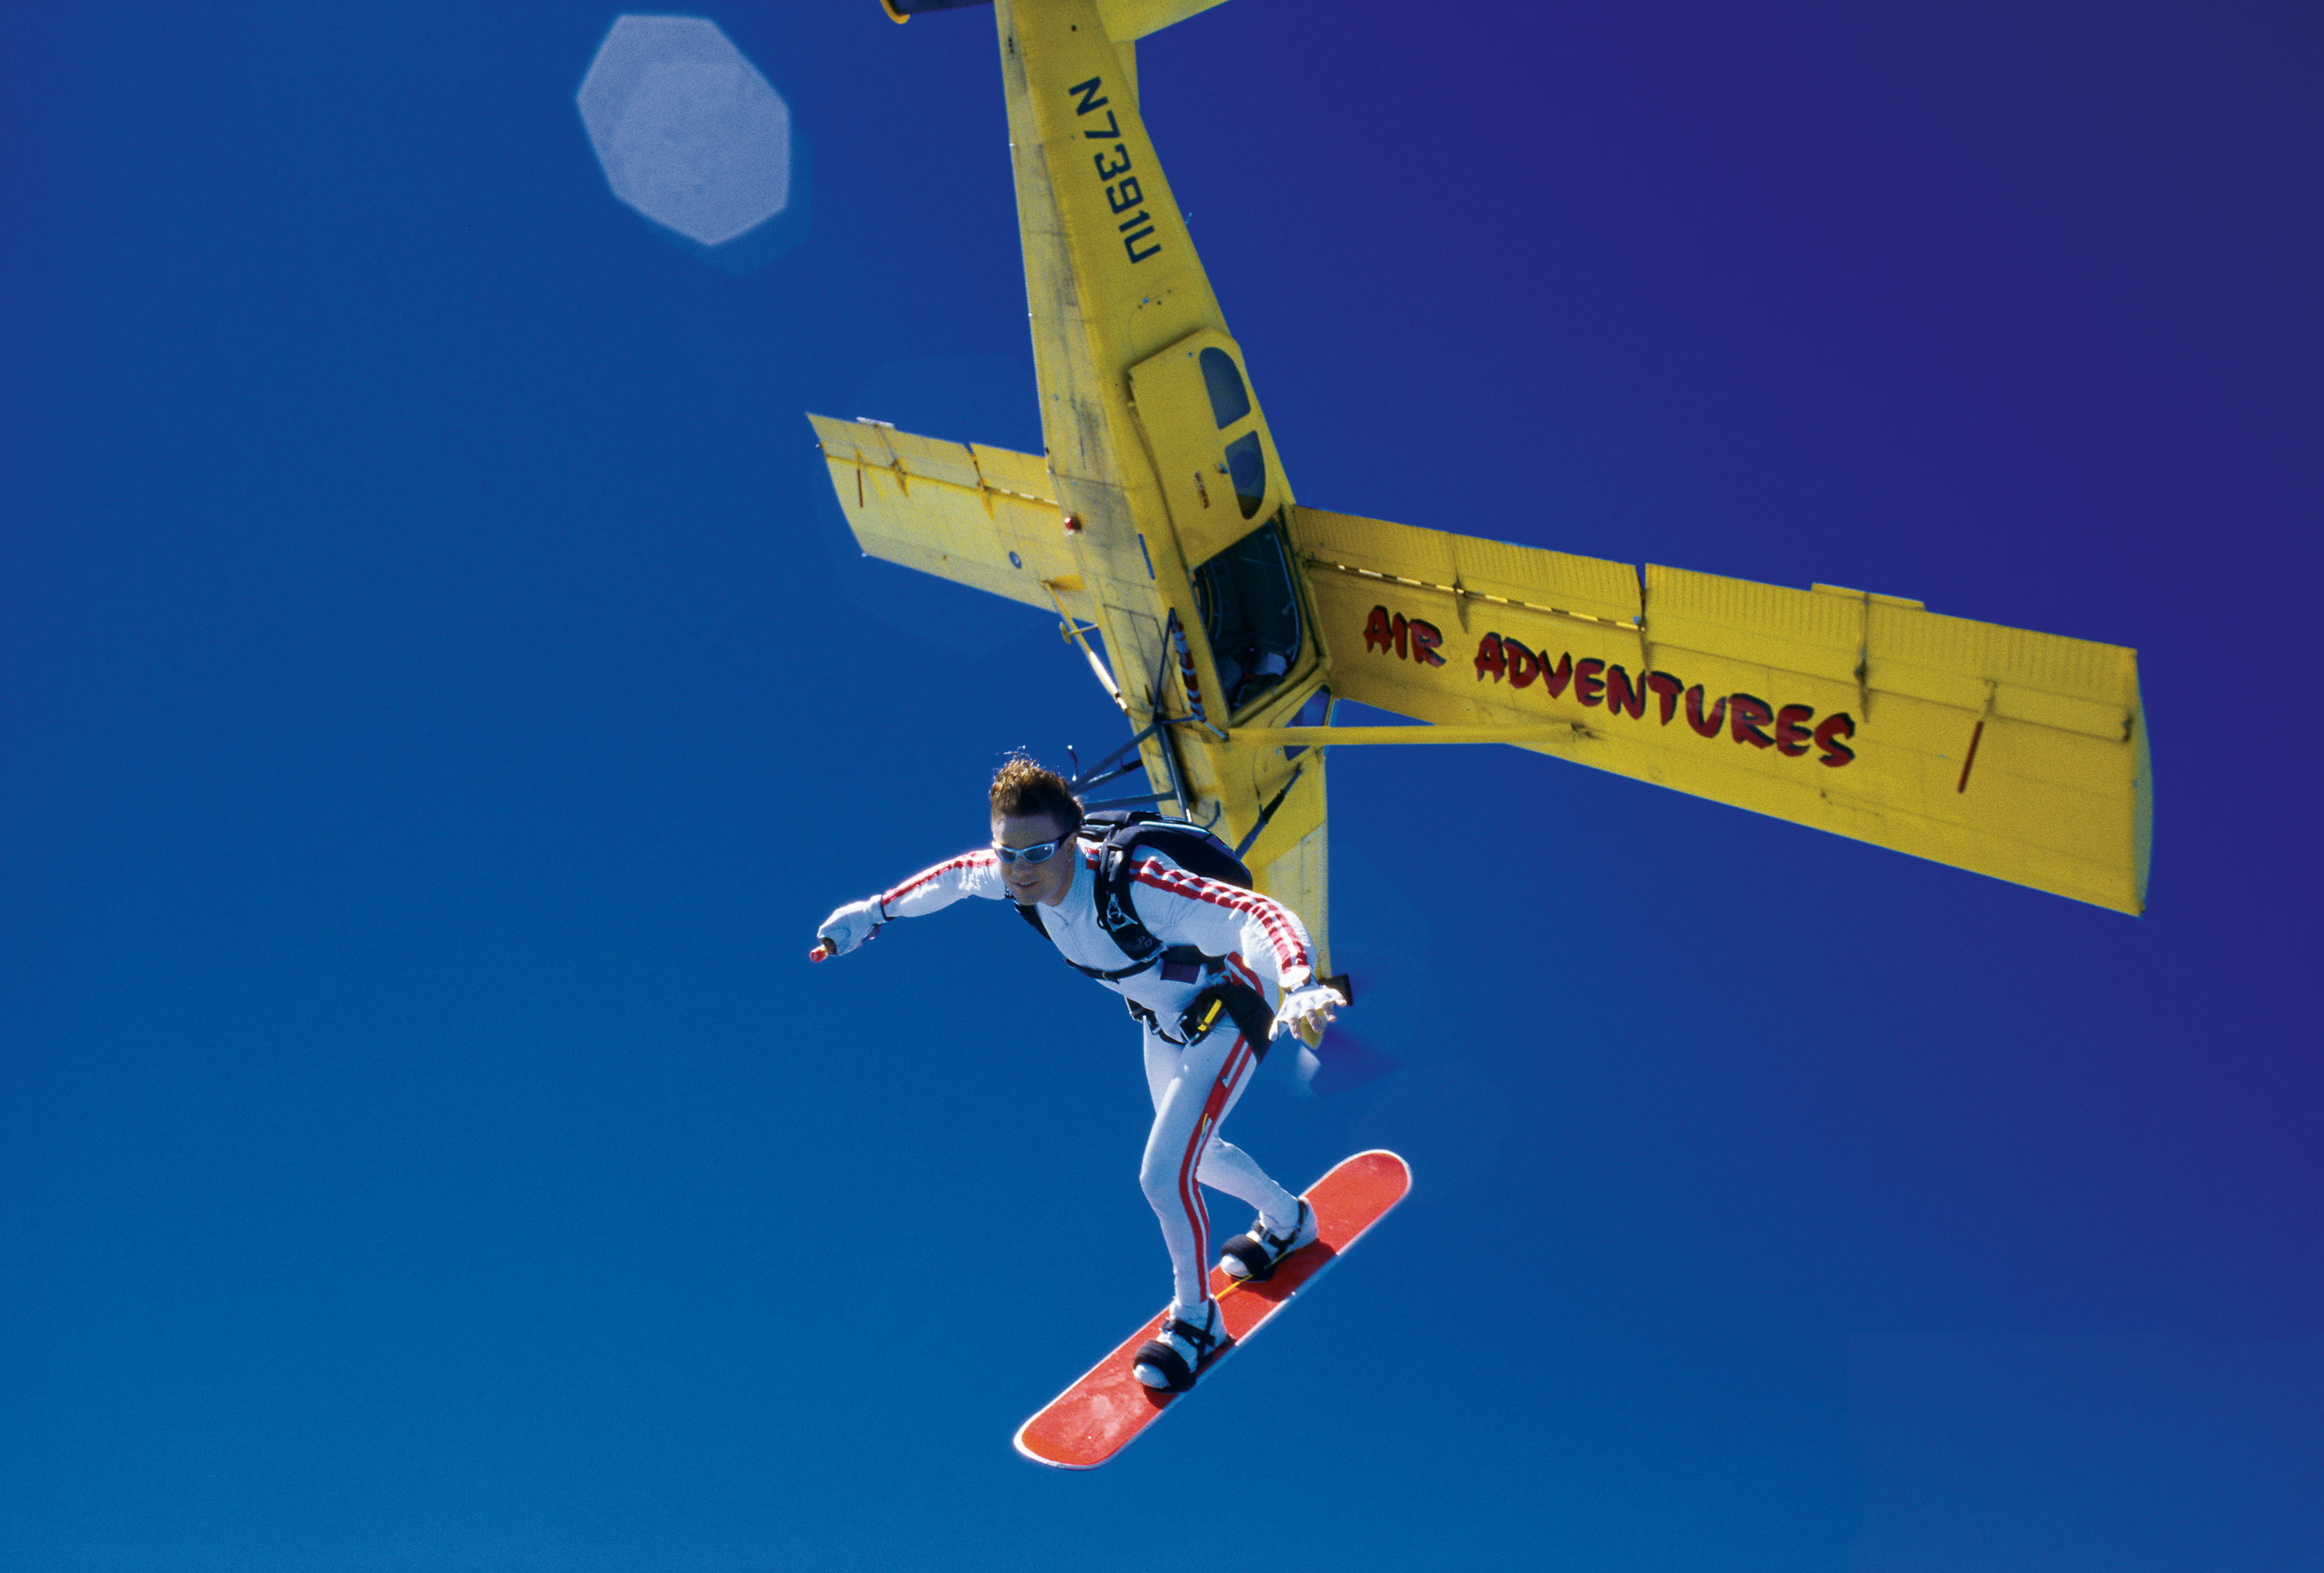 Skysurfing: Surfing-style aerobatics during freefall, Air adventures. 3000x2040 HD Background.